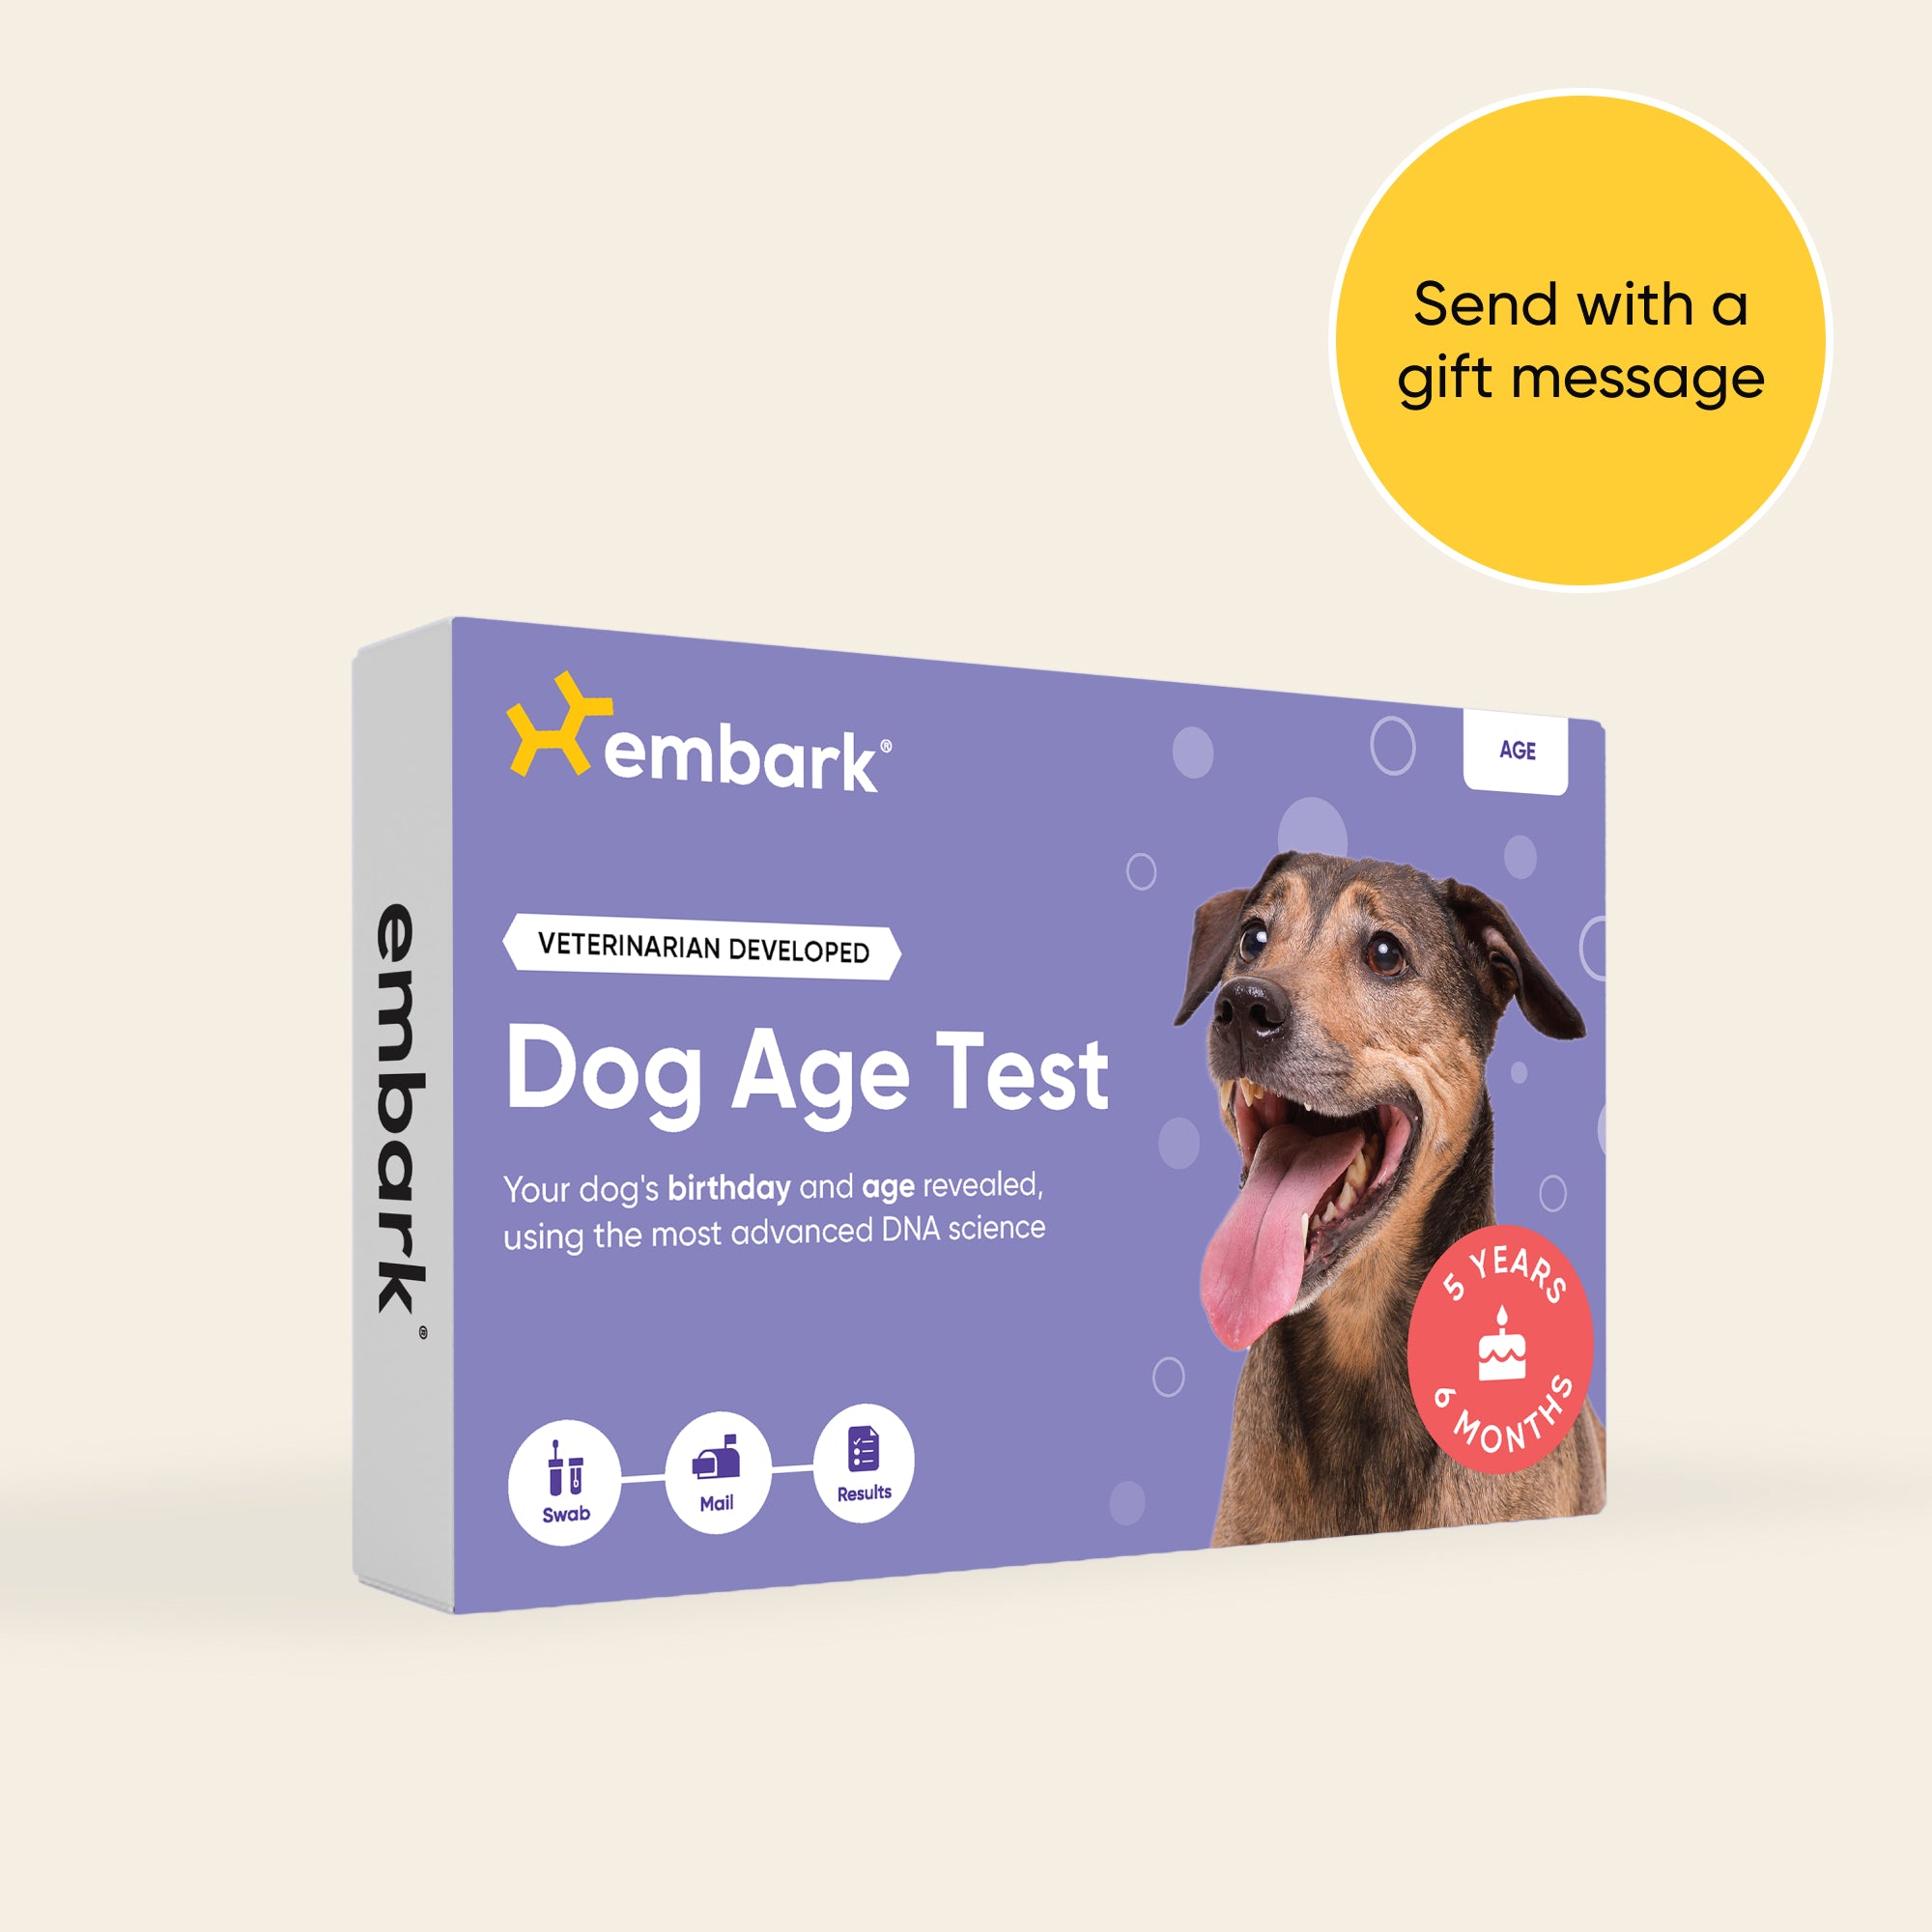 I Tried the Embark Vet Dog DNA Test on My Adopted Pup and Got